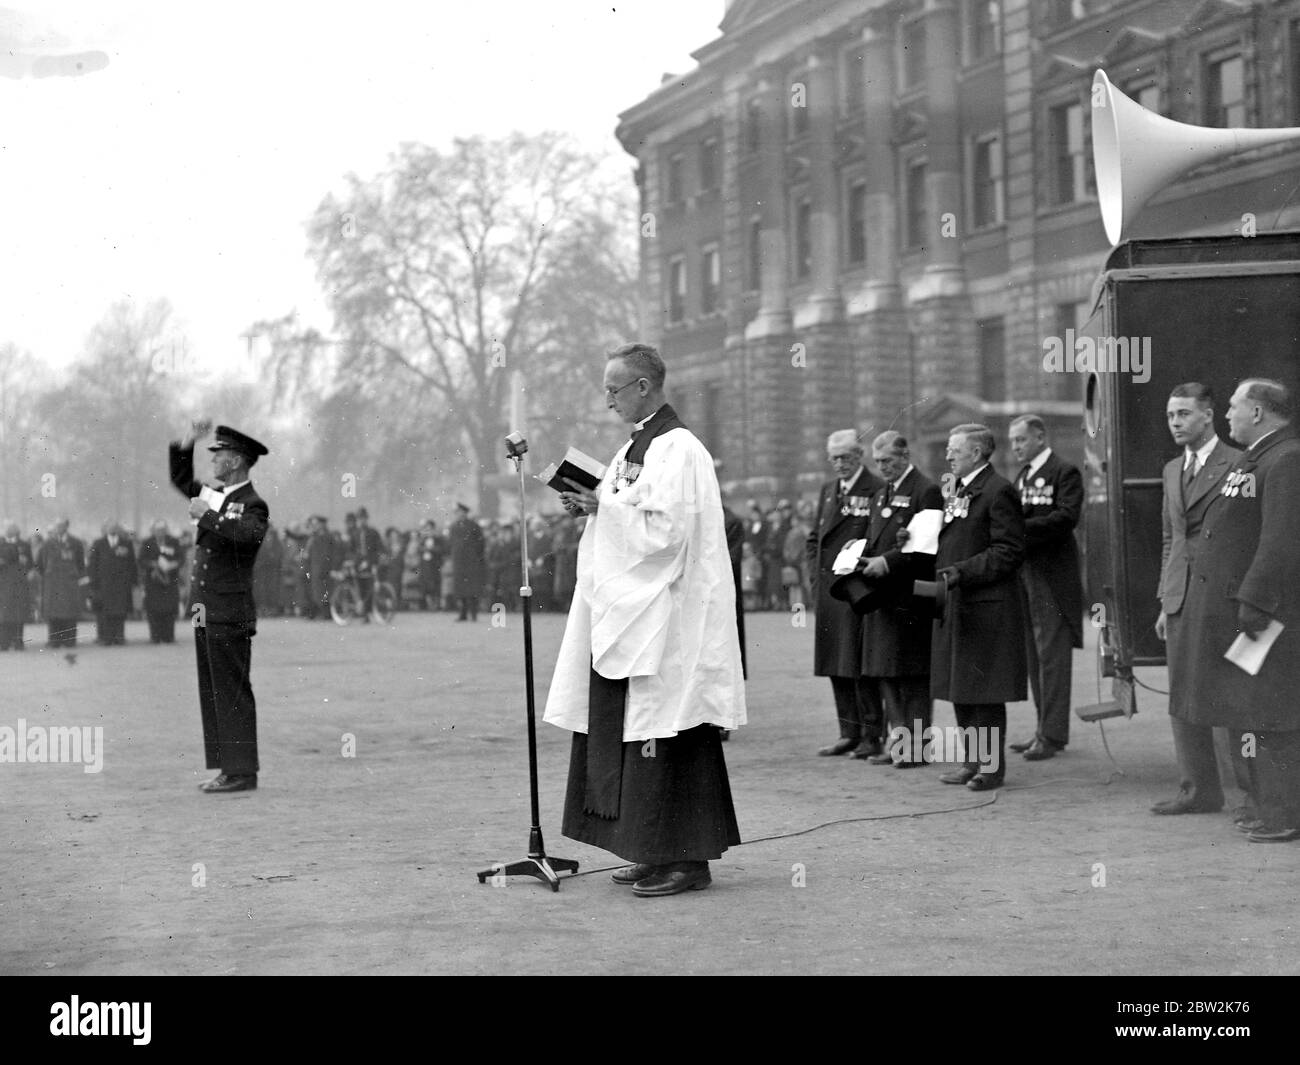 Royal Naval Old Comrades Association Annual Parade, Horse Guards. Rev Woods, D.S.O., Naval Chaplain. Stock Photo